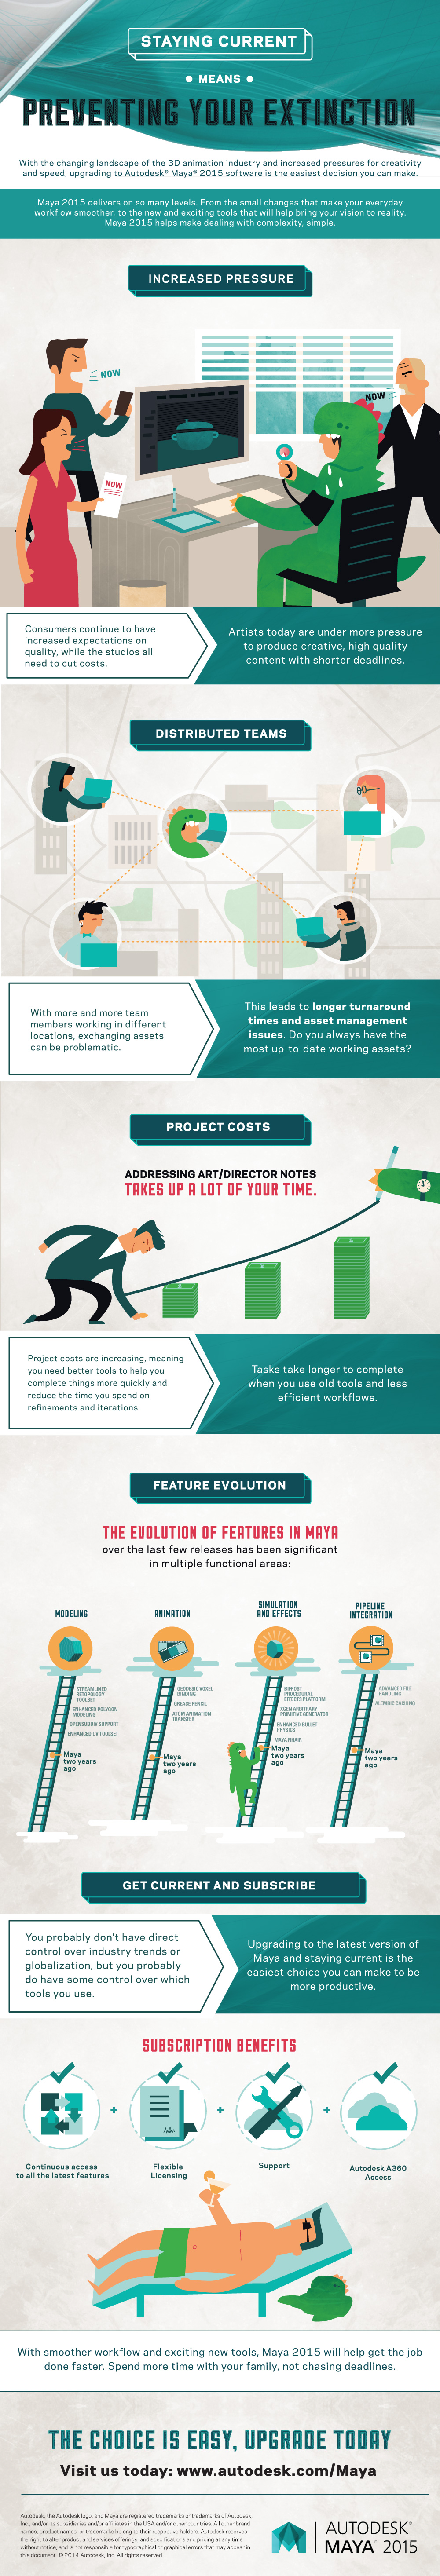 Preventing Your Extinction w/ Autodesk Maya 2015 Infographic